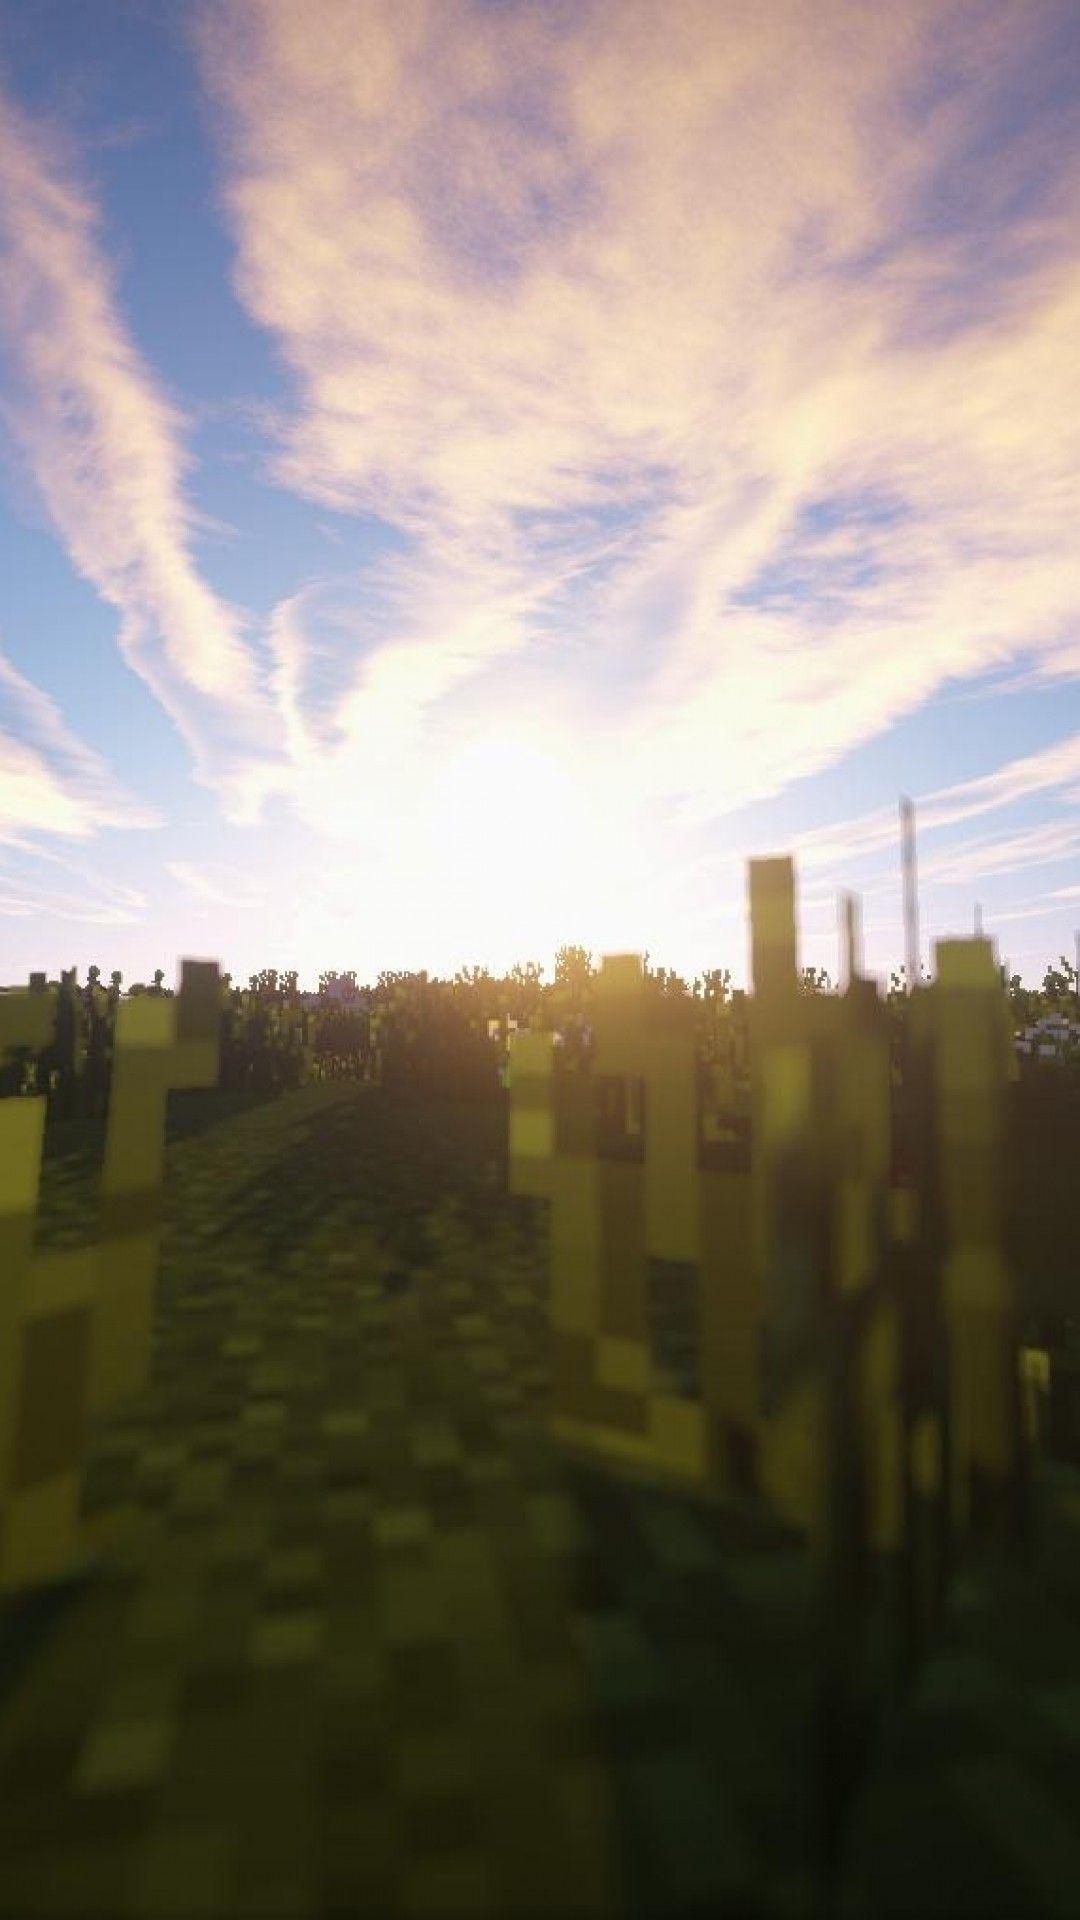 Minecraft Iphone Wallpapers Top Free Minecraft Iphone Backgrounds Wallpaperaccess